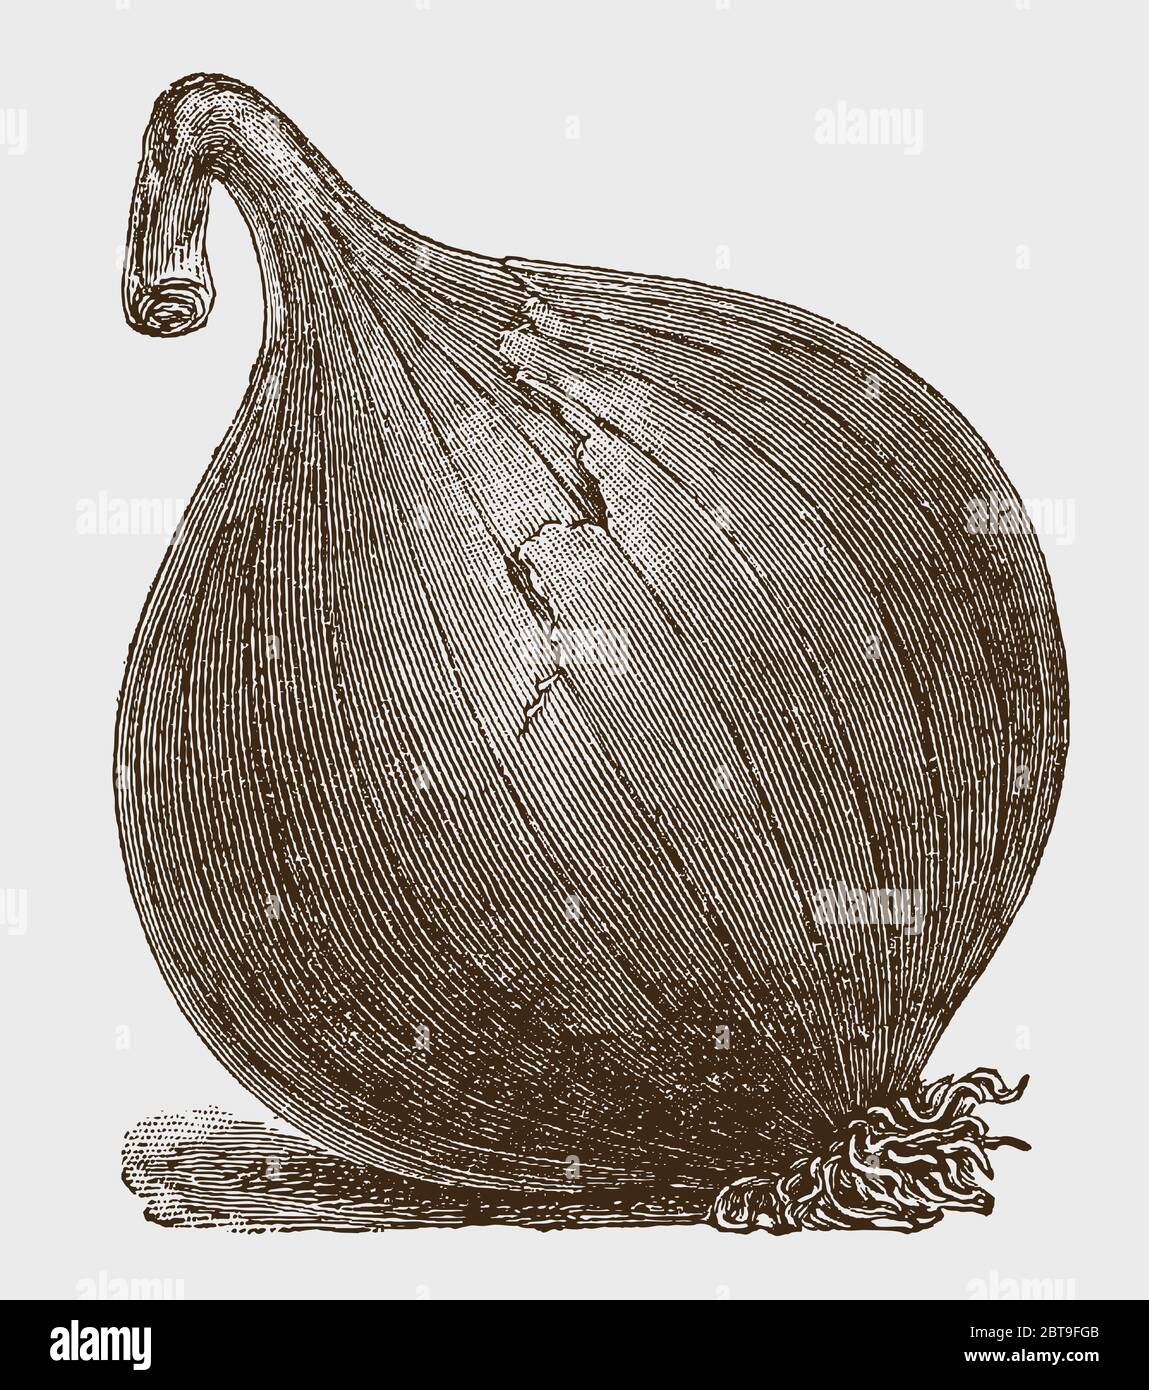 Globe-shaped onion with a brittle top, lying slightly tilted to the side, after a historical engraving from the early 20th century Stock Vector